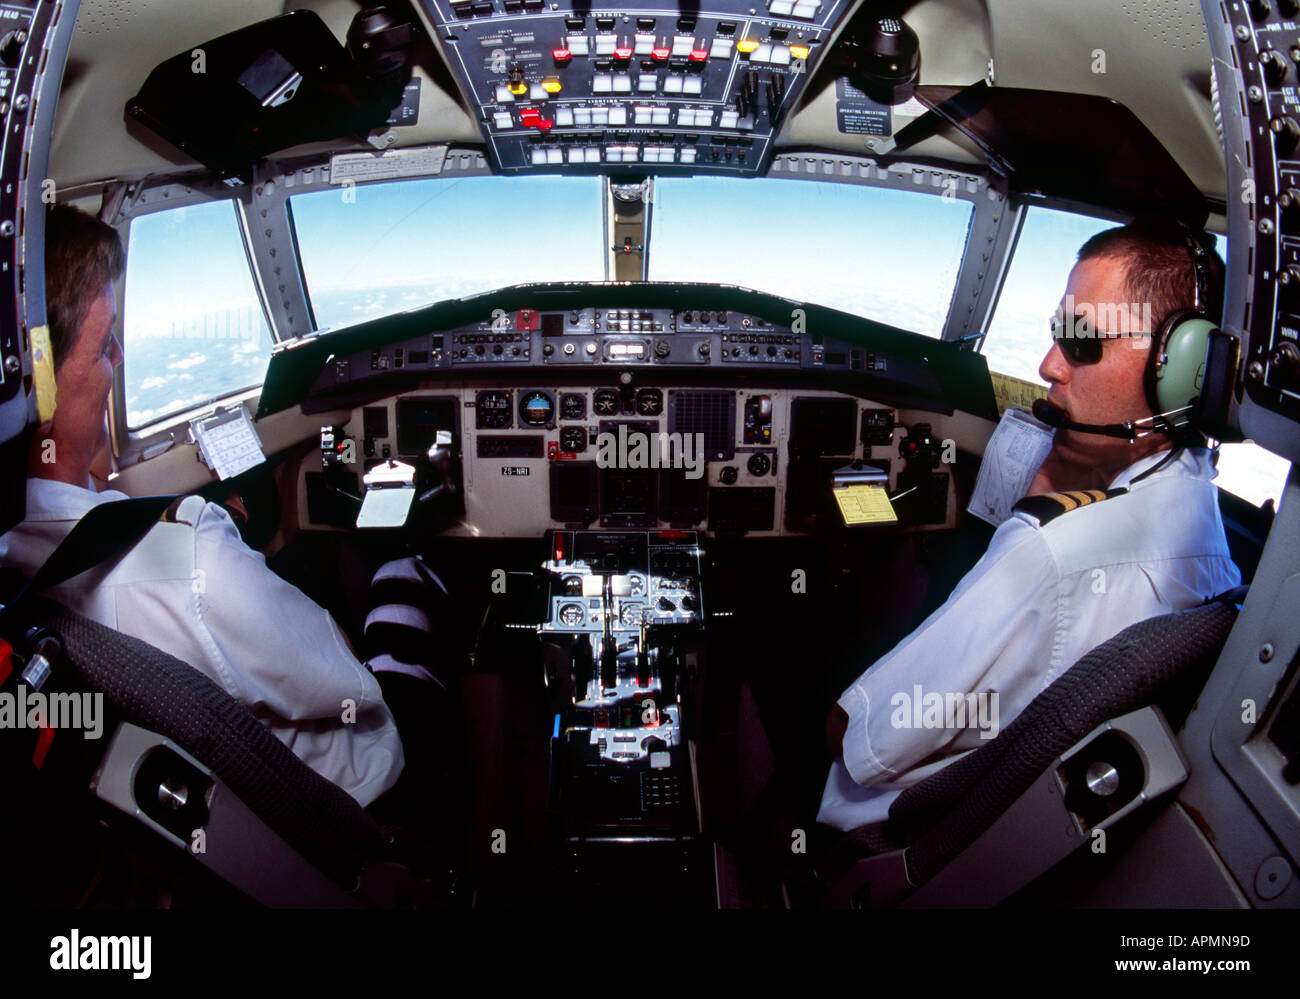 Cockpit view of Jetstream 41 turboprop aircraft with pilot and co-pilot flying the aircraft. Stock Photo